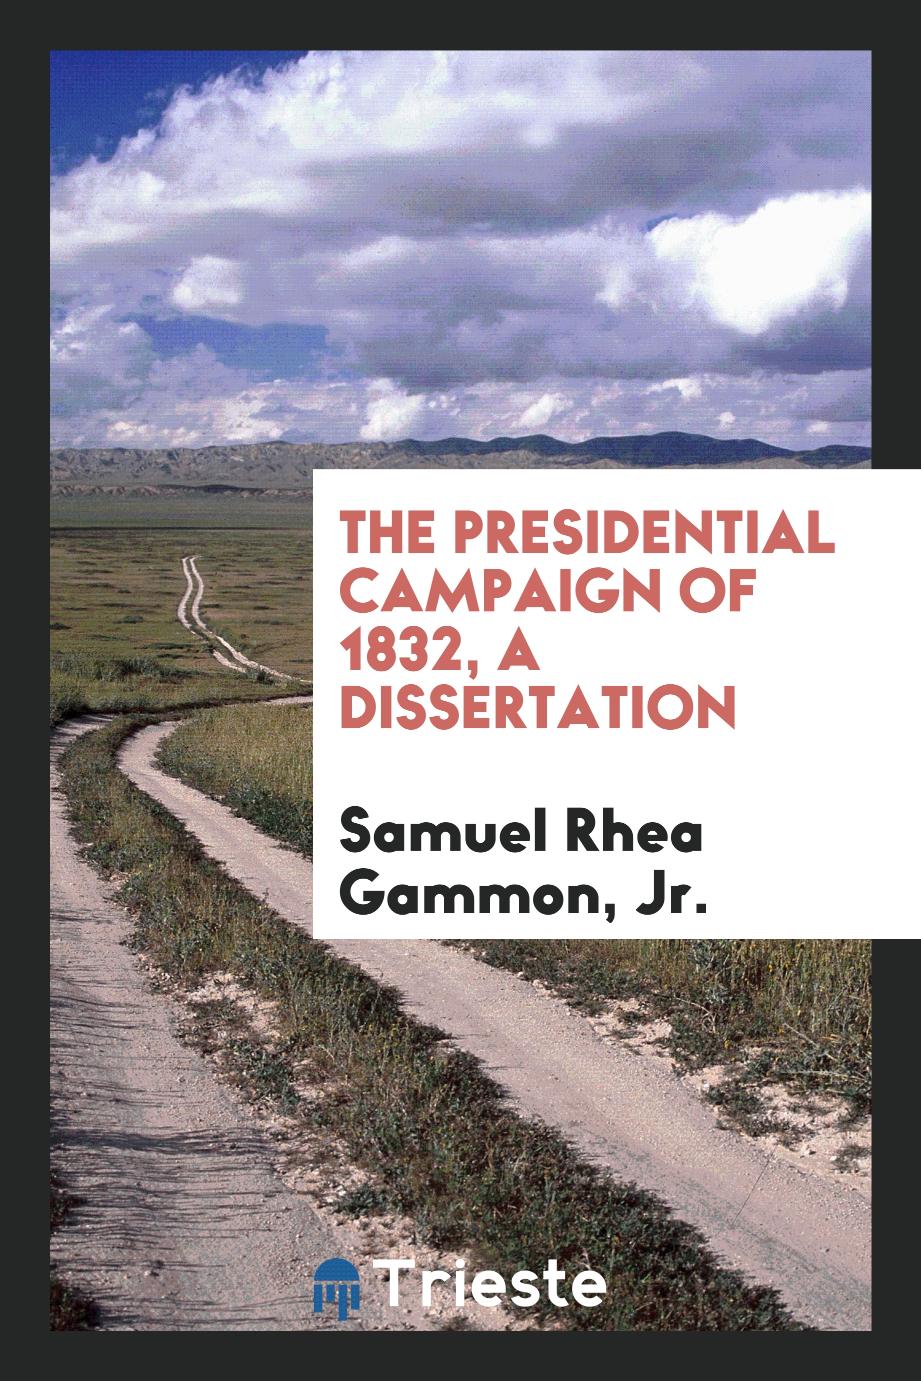 The Presidential Campaign of 1832, A Dissertation